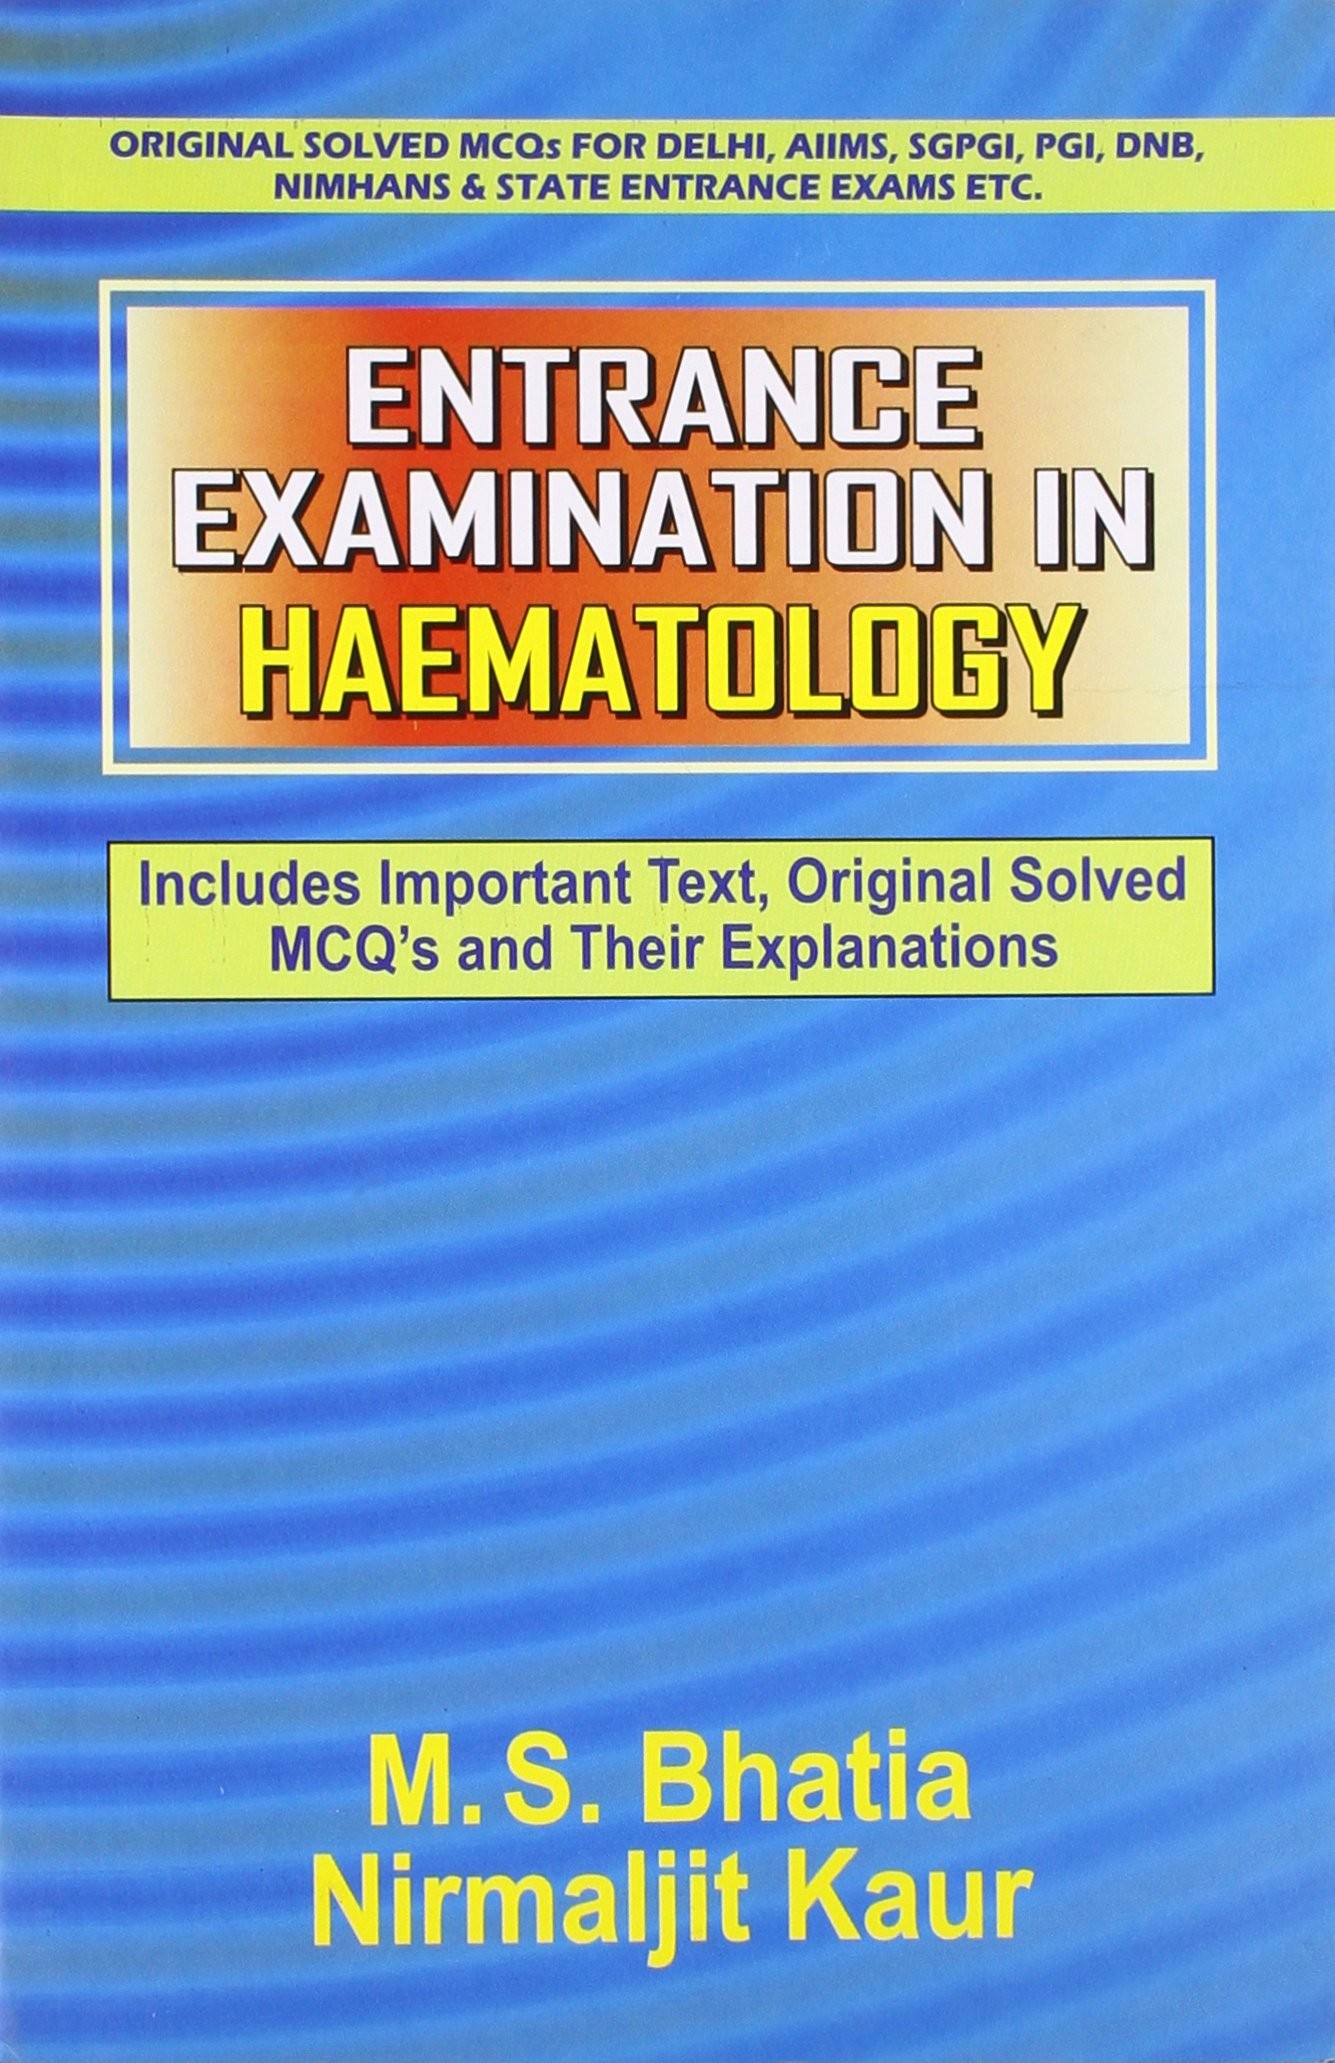 Entrance Examination in Haematology: Includes Important Text, Original Solved MCQ's and Their Explanations